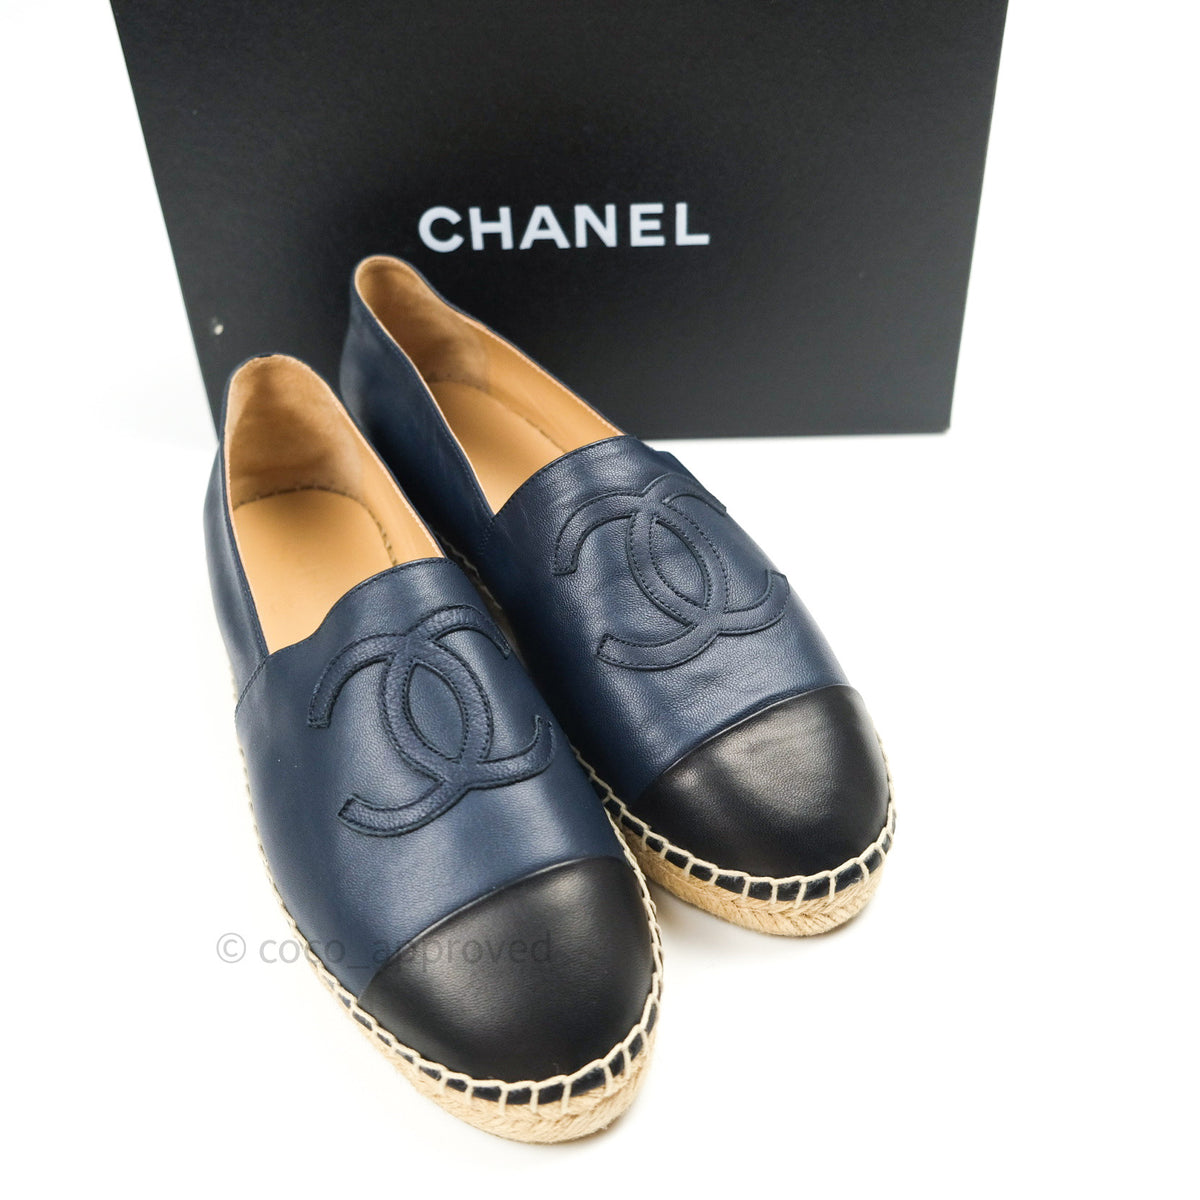 Chanel Espadrille Navy Black Leather Size 39 – Coco Approved Studio